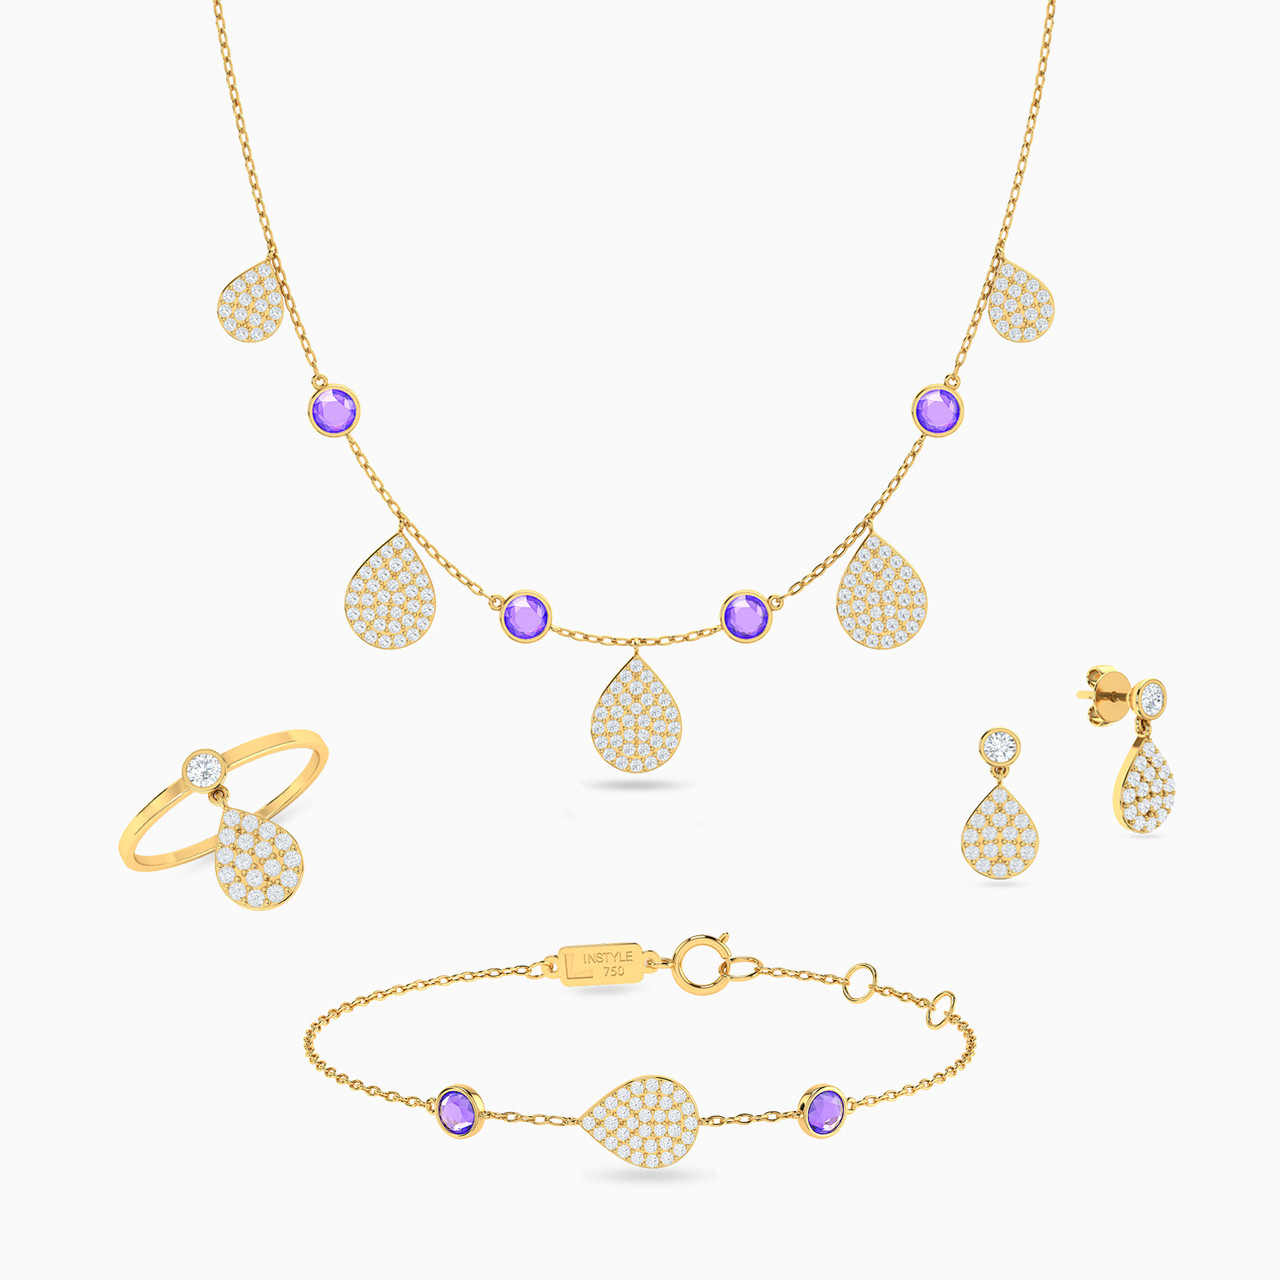 18K Gold Colored Stones Jewelry Set -4 Pieces